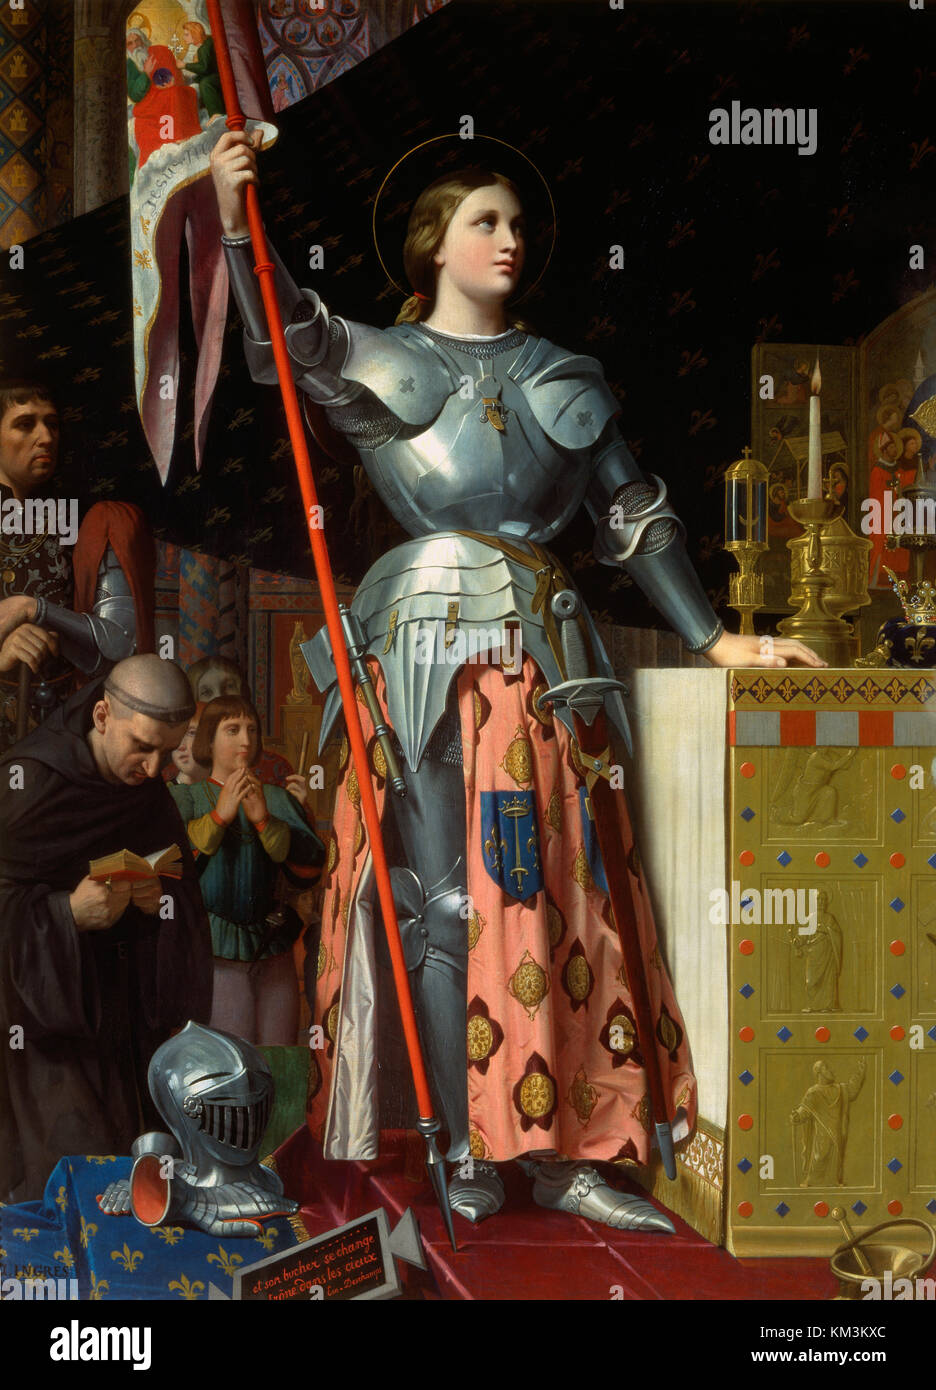 Joan of Arc (1412-1431). The Maind of Orleans, heroine of France durig Hundred Years'War. Joan of Arc at the Coronation of Charles VII, 1854. By Jean-Auguste-Dominique Dominique Ingres (1780-1867). Louvre Museum. Paris. France. Stock Photo